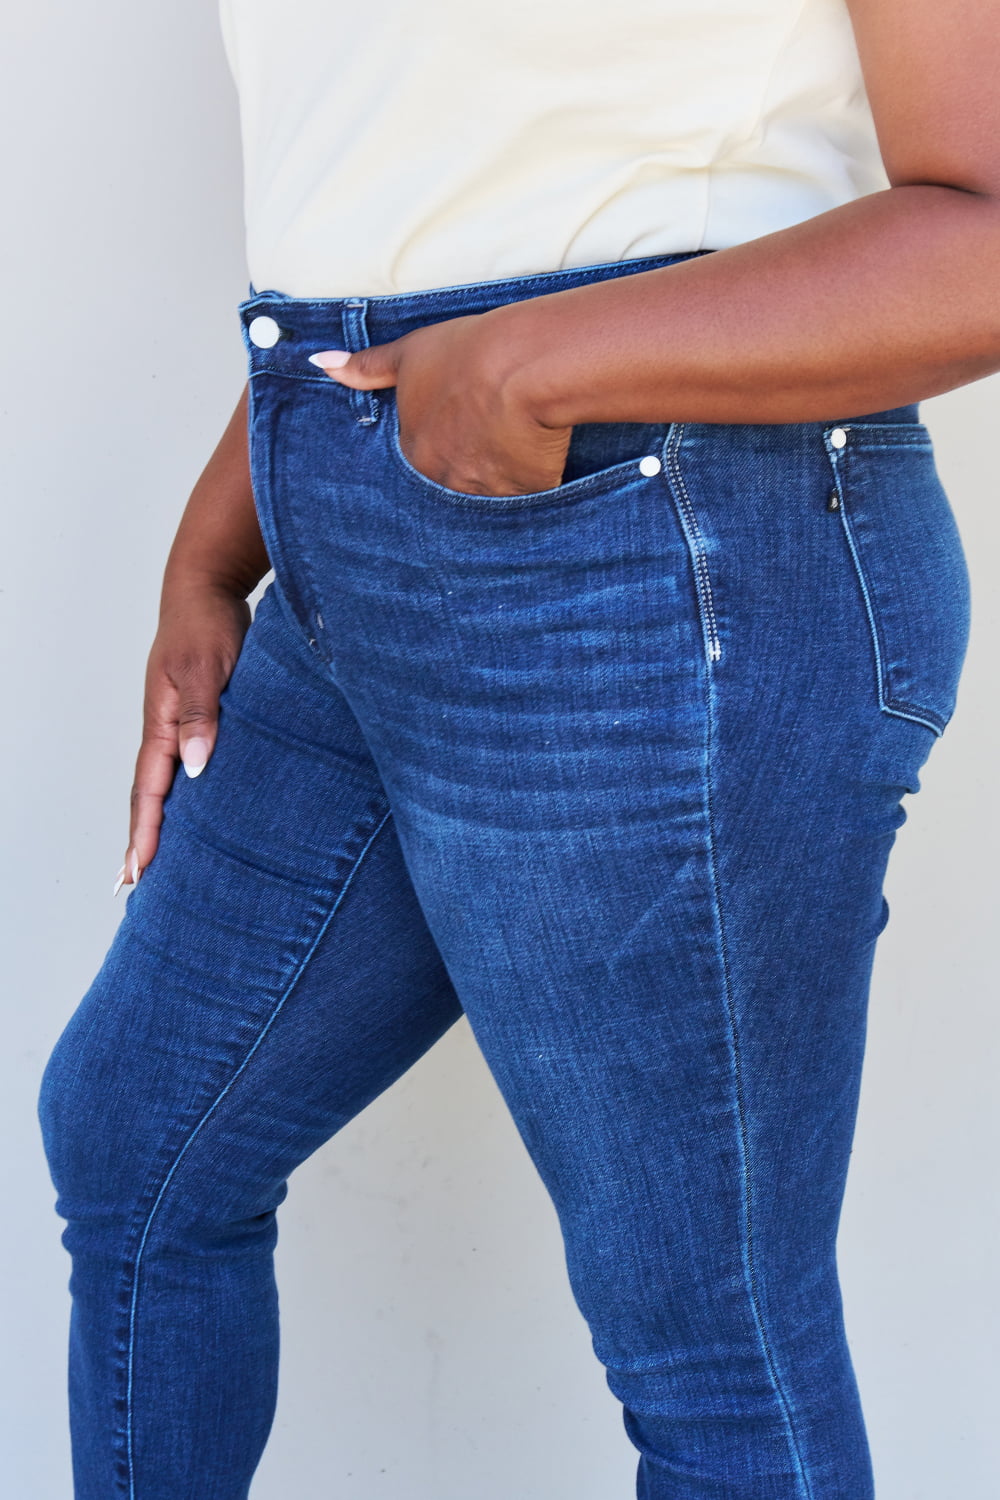 Blue Marie Mid Rise Crinkle Ankle Detail Skinny Jeans